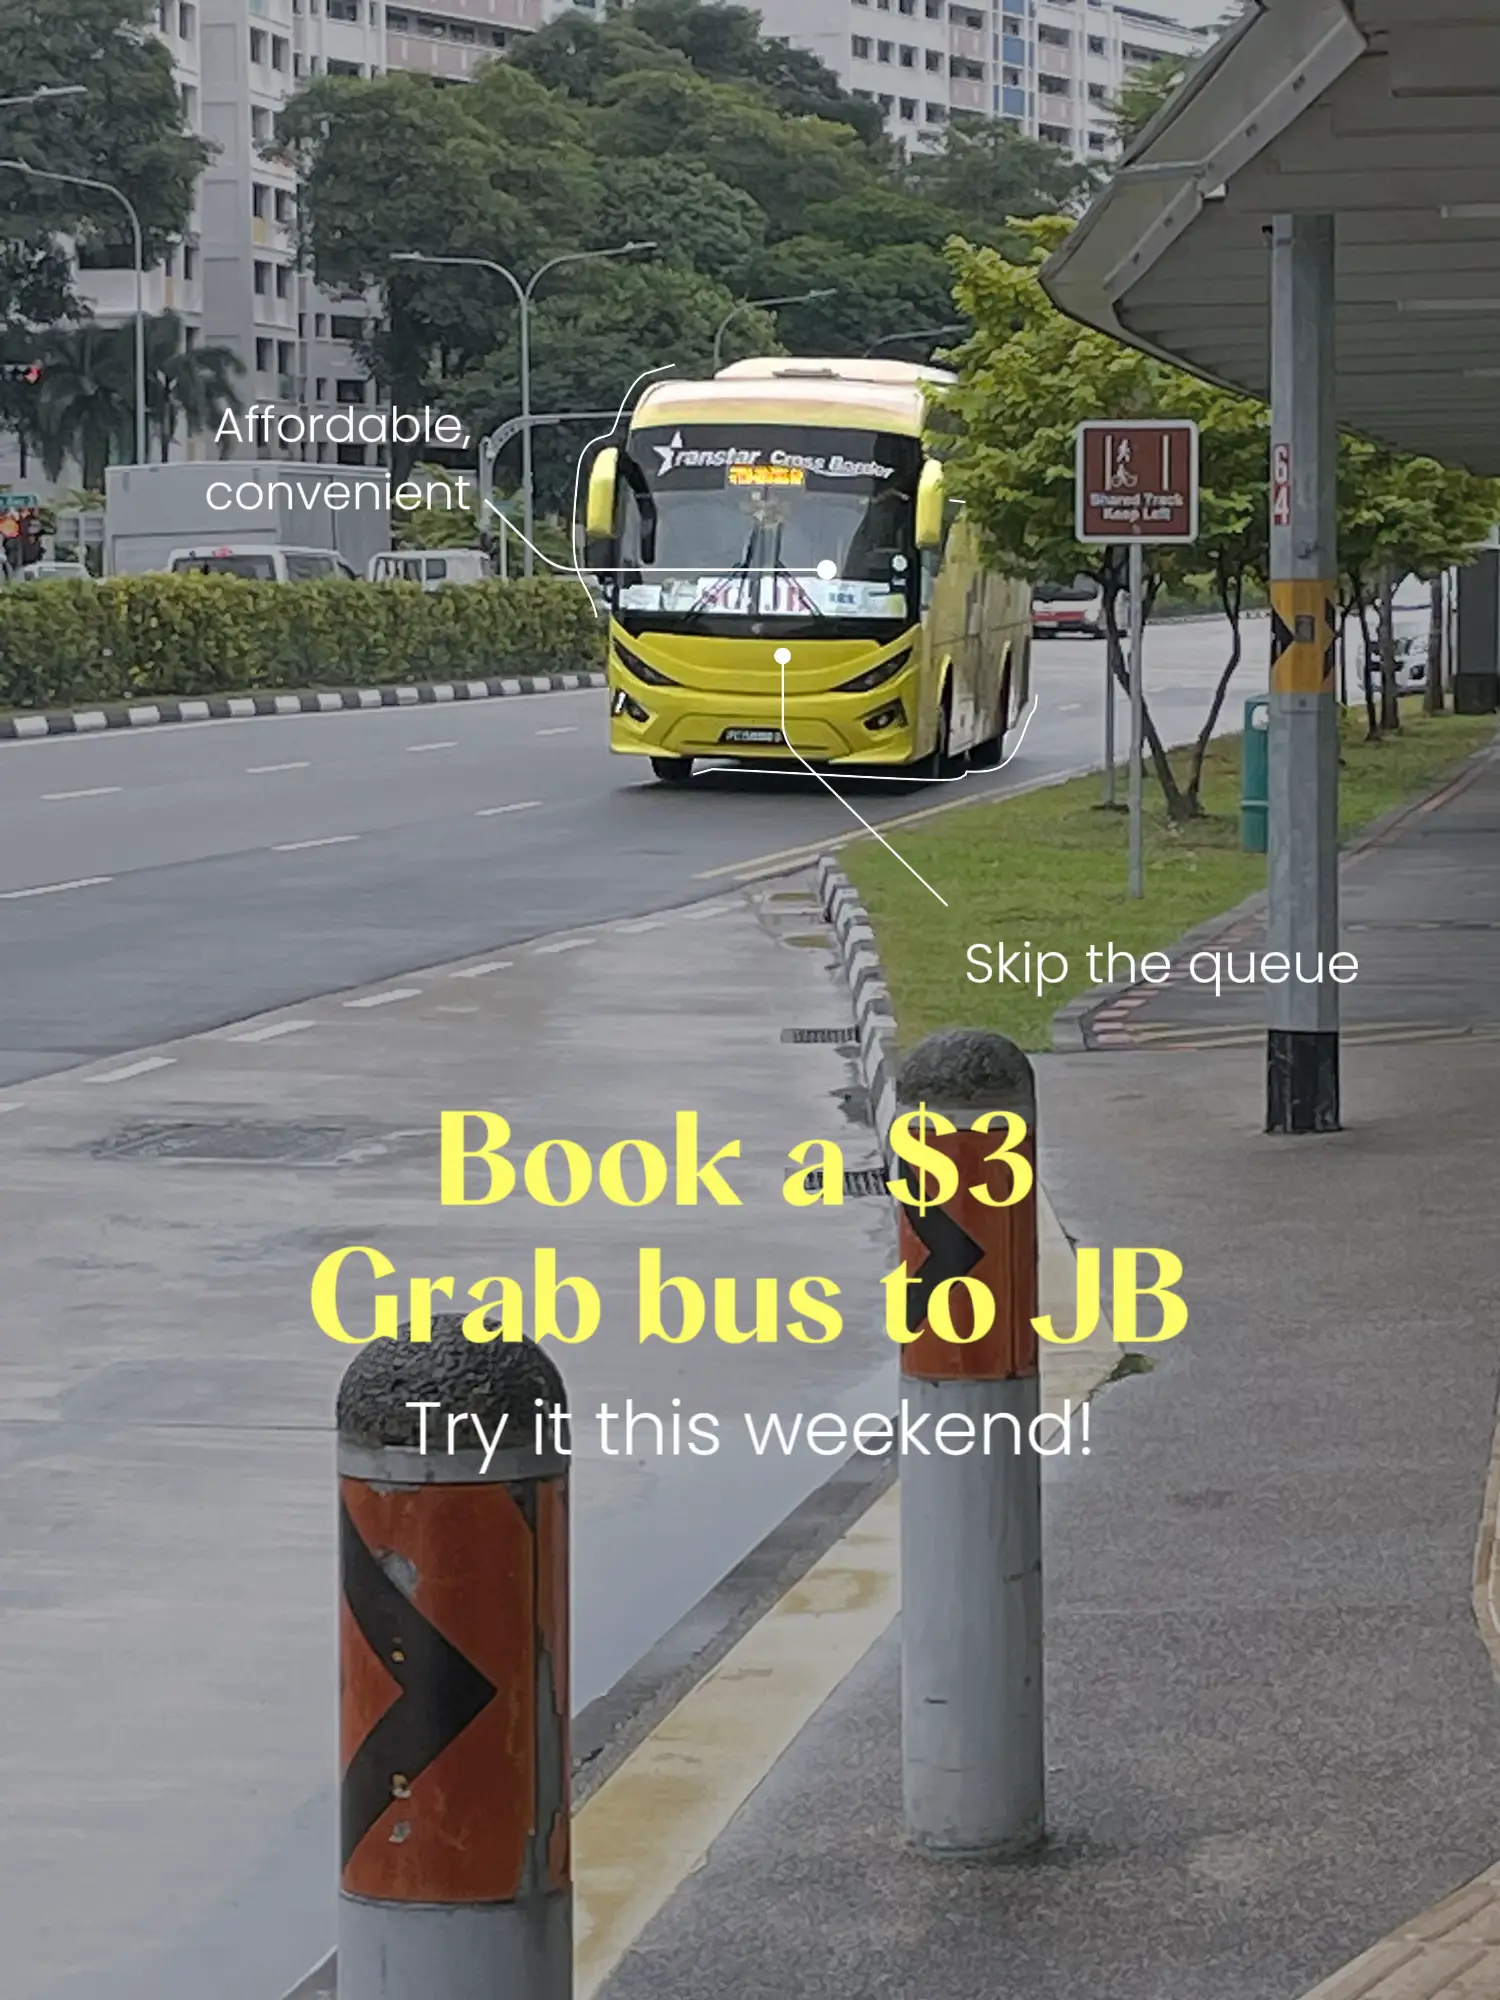 Book a $3 Grab Bus to JB! 🚌's images(0)